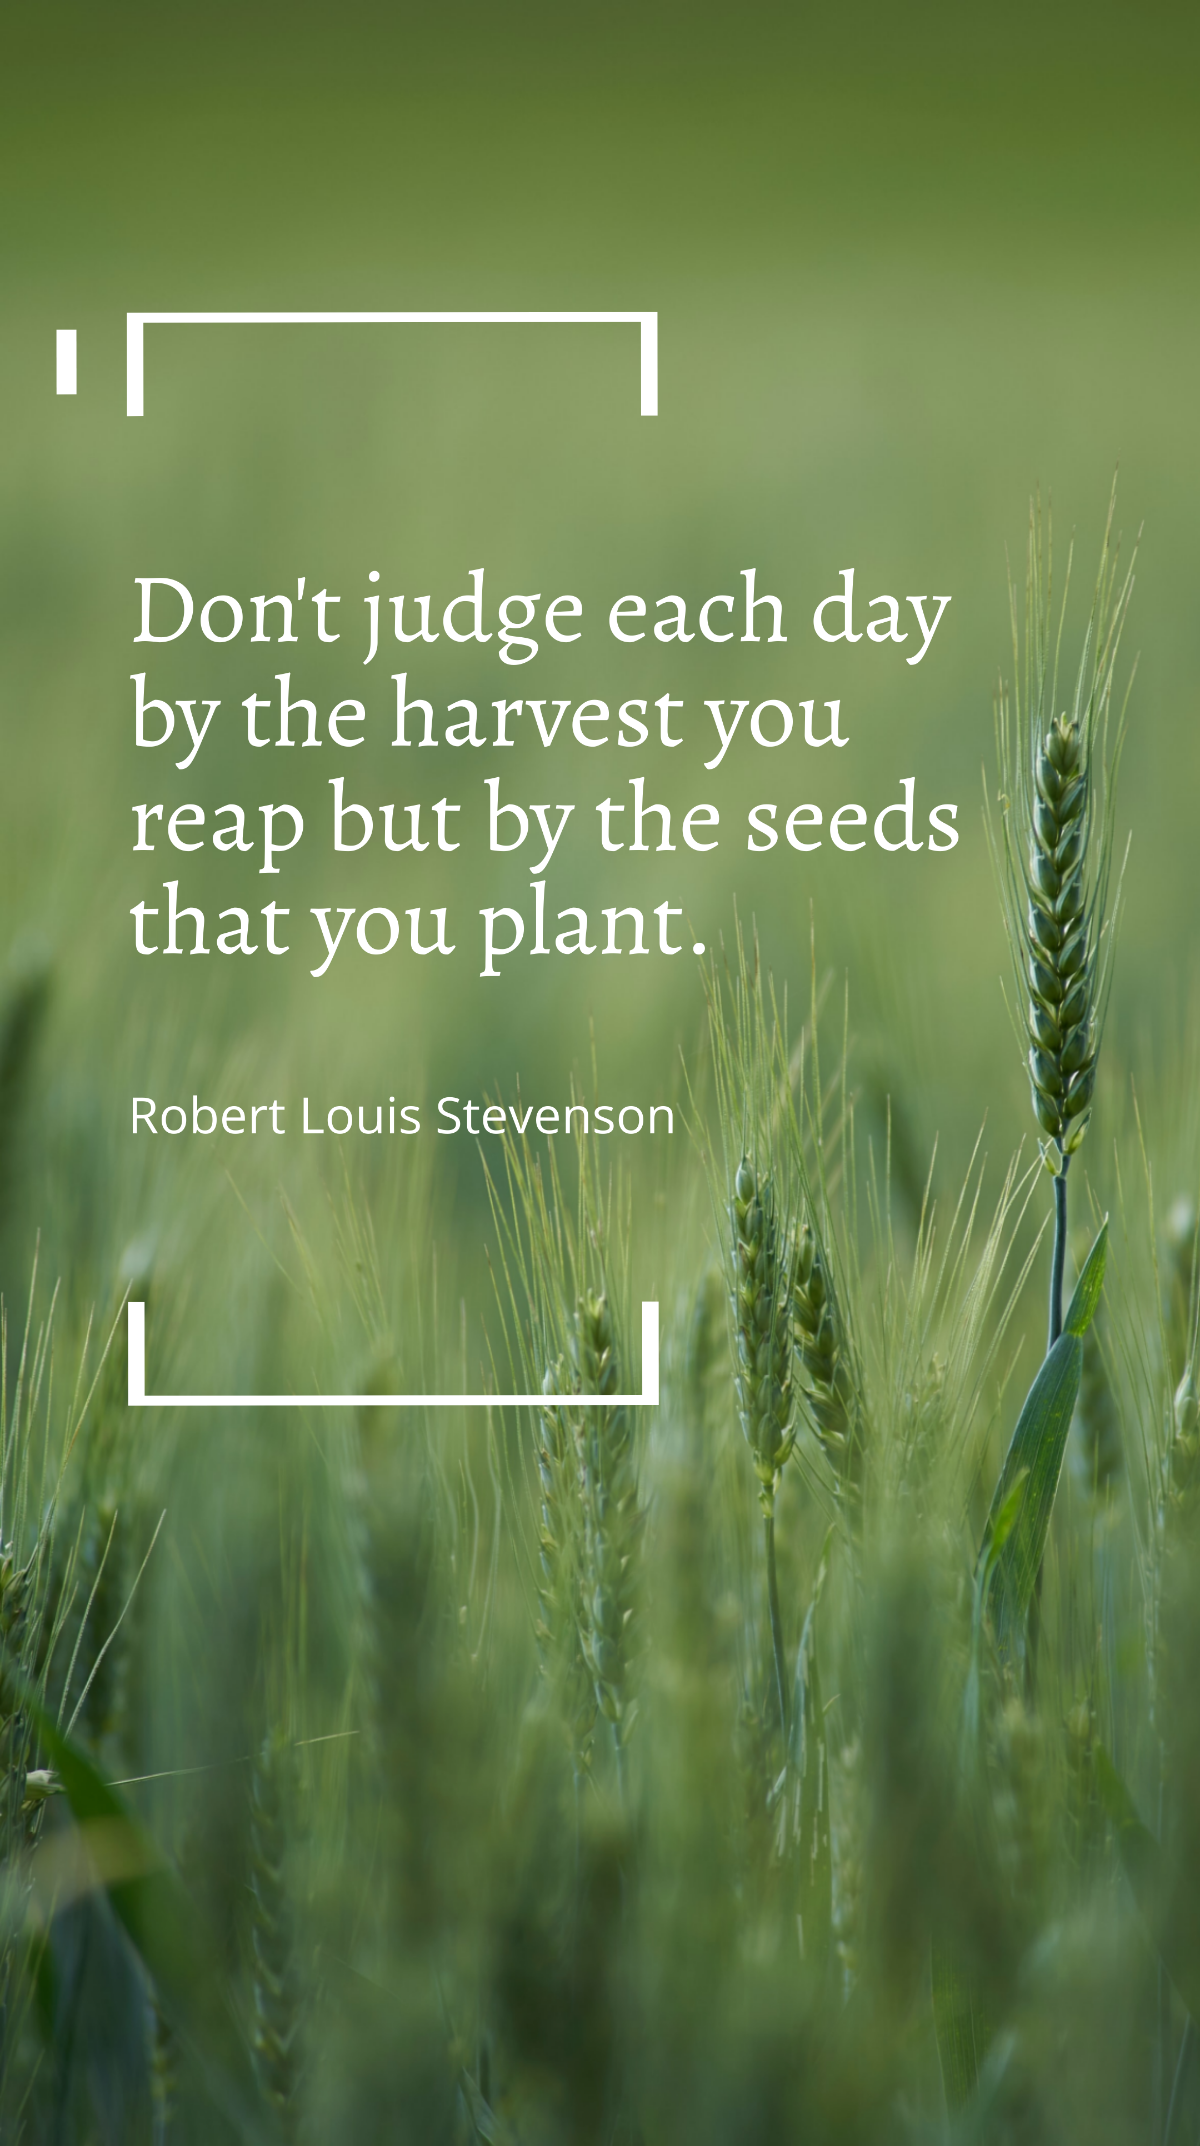 Robert Louis Stevenson - Don't judge each day by the harvest you reap but by the seeds that you plant Template